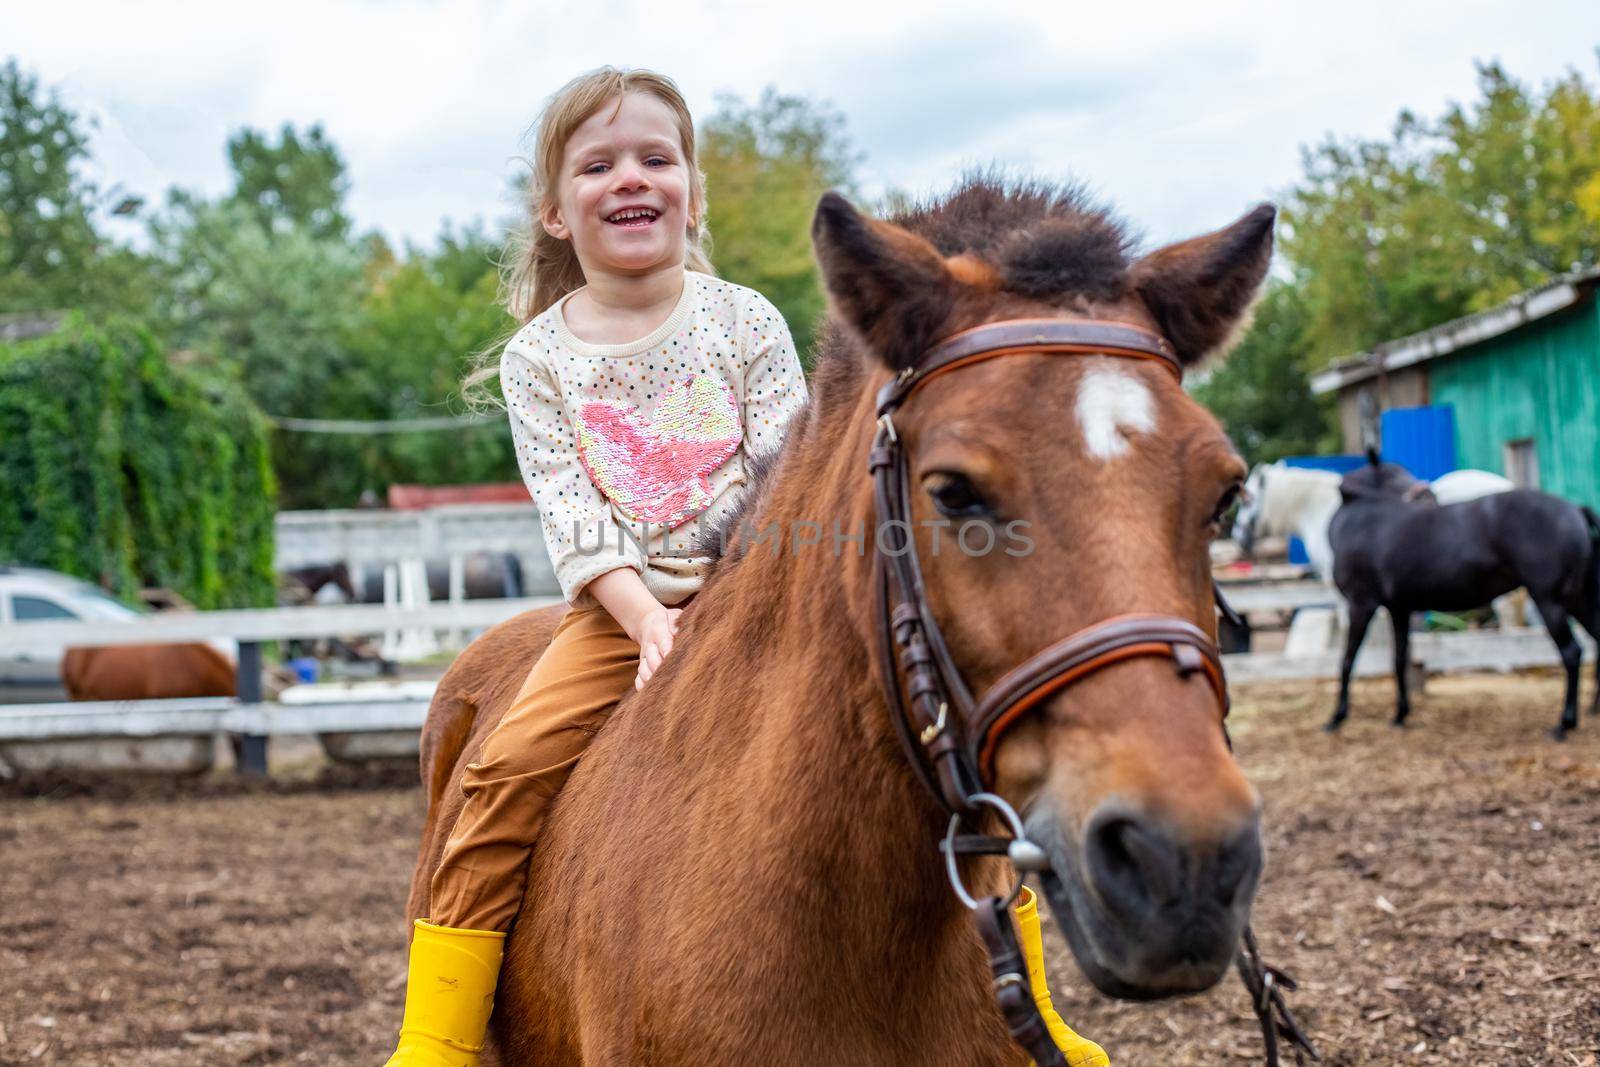 portrait of happy little girl riding a horse bareback and laugh